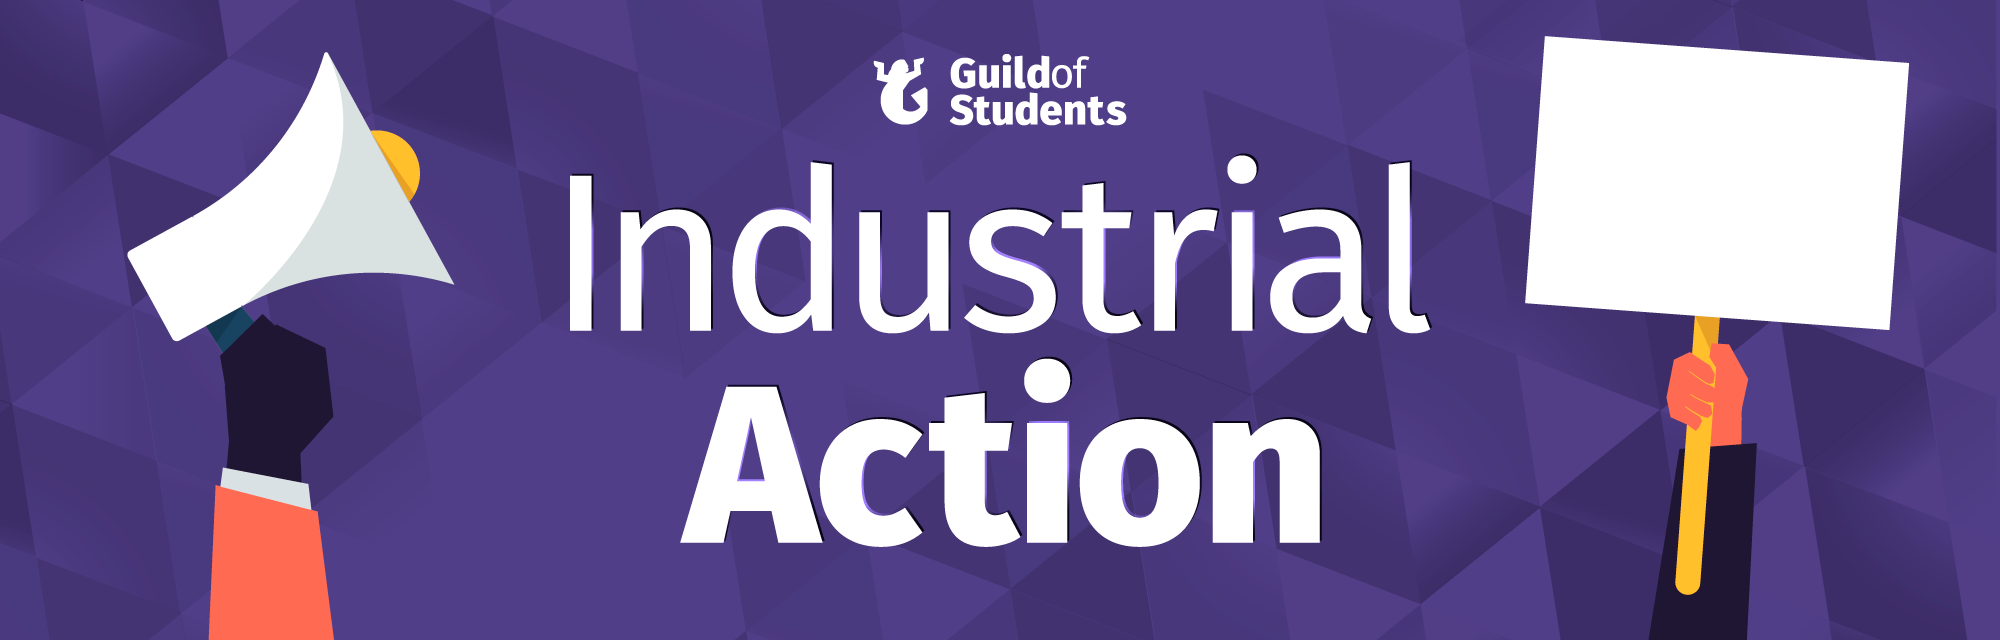 Industrial Action Graphic